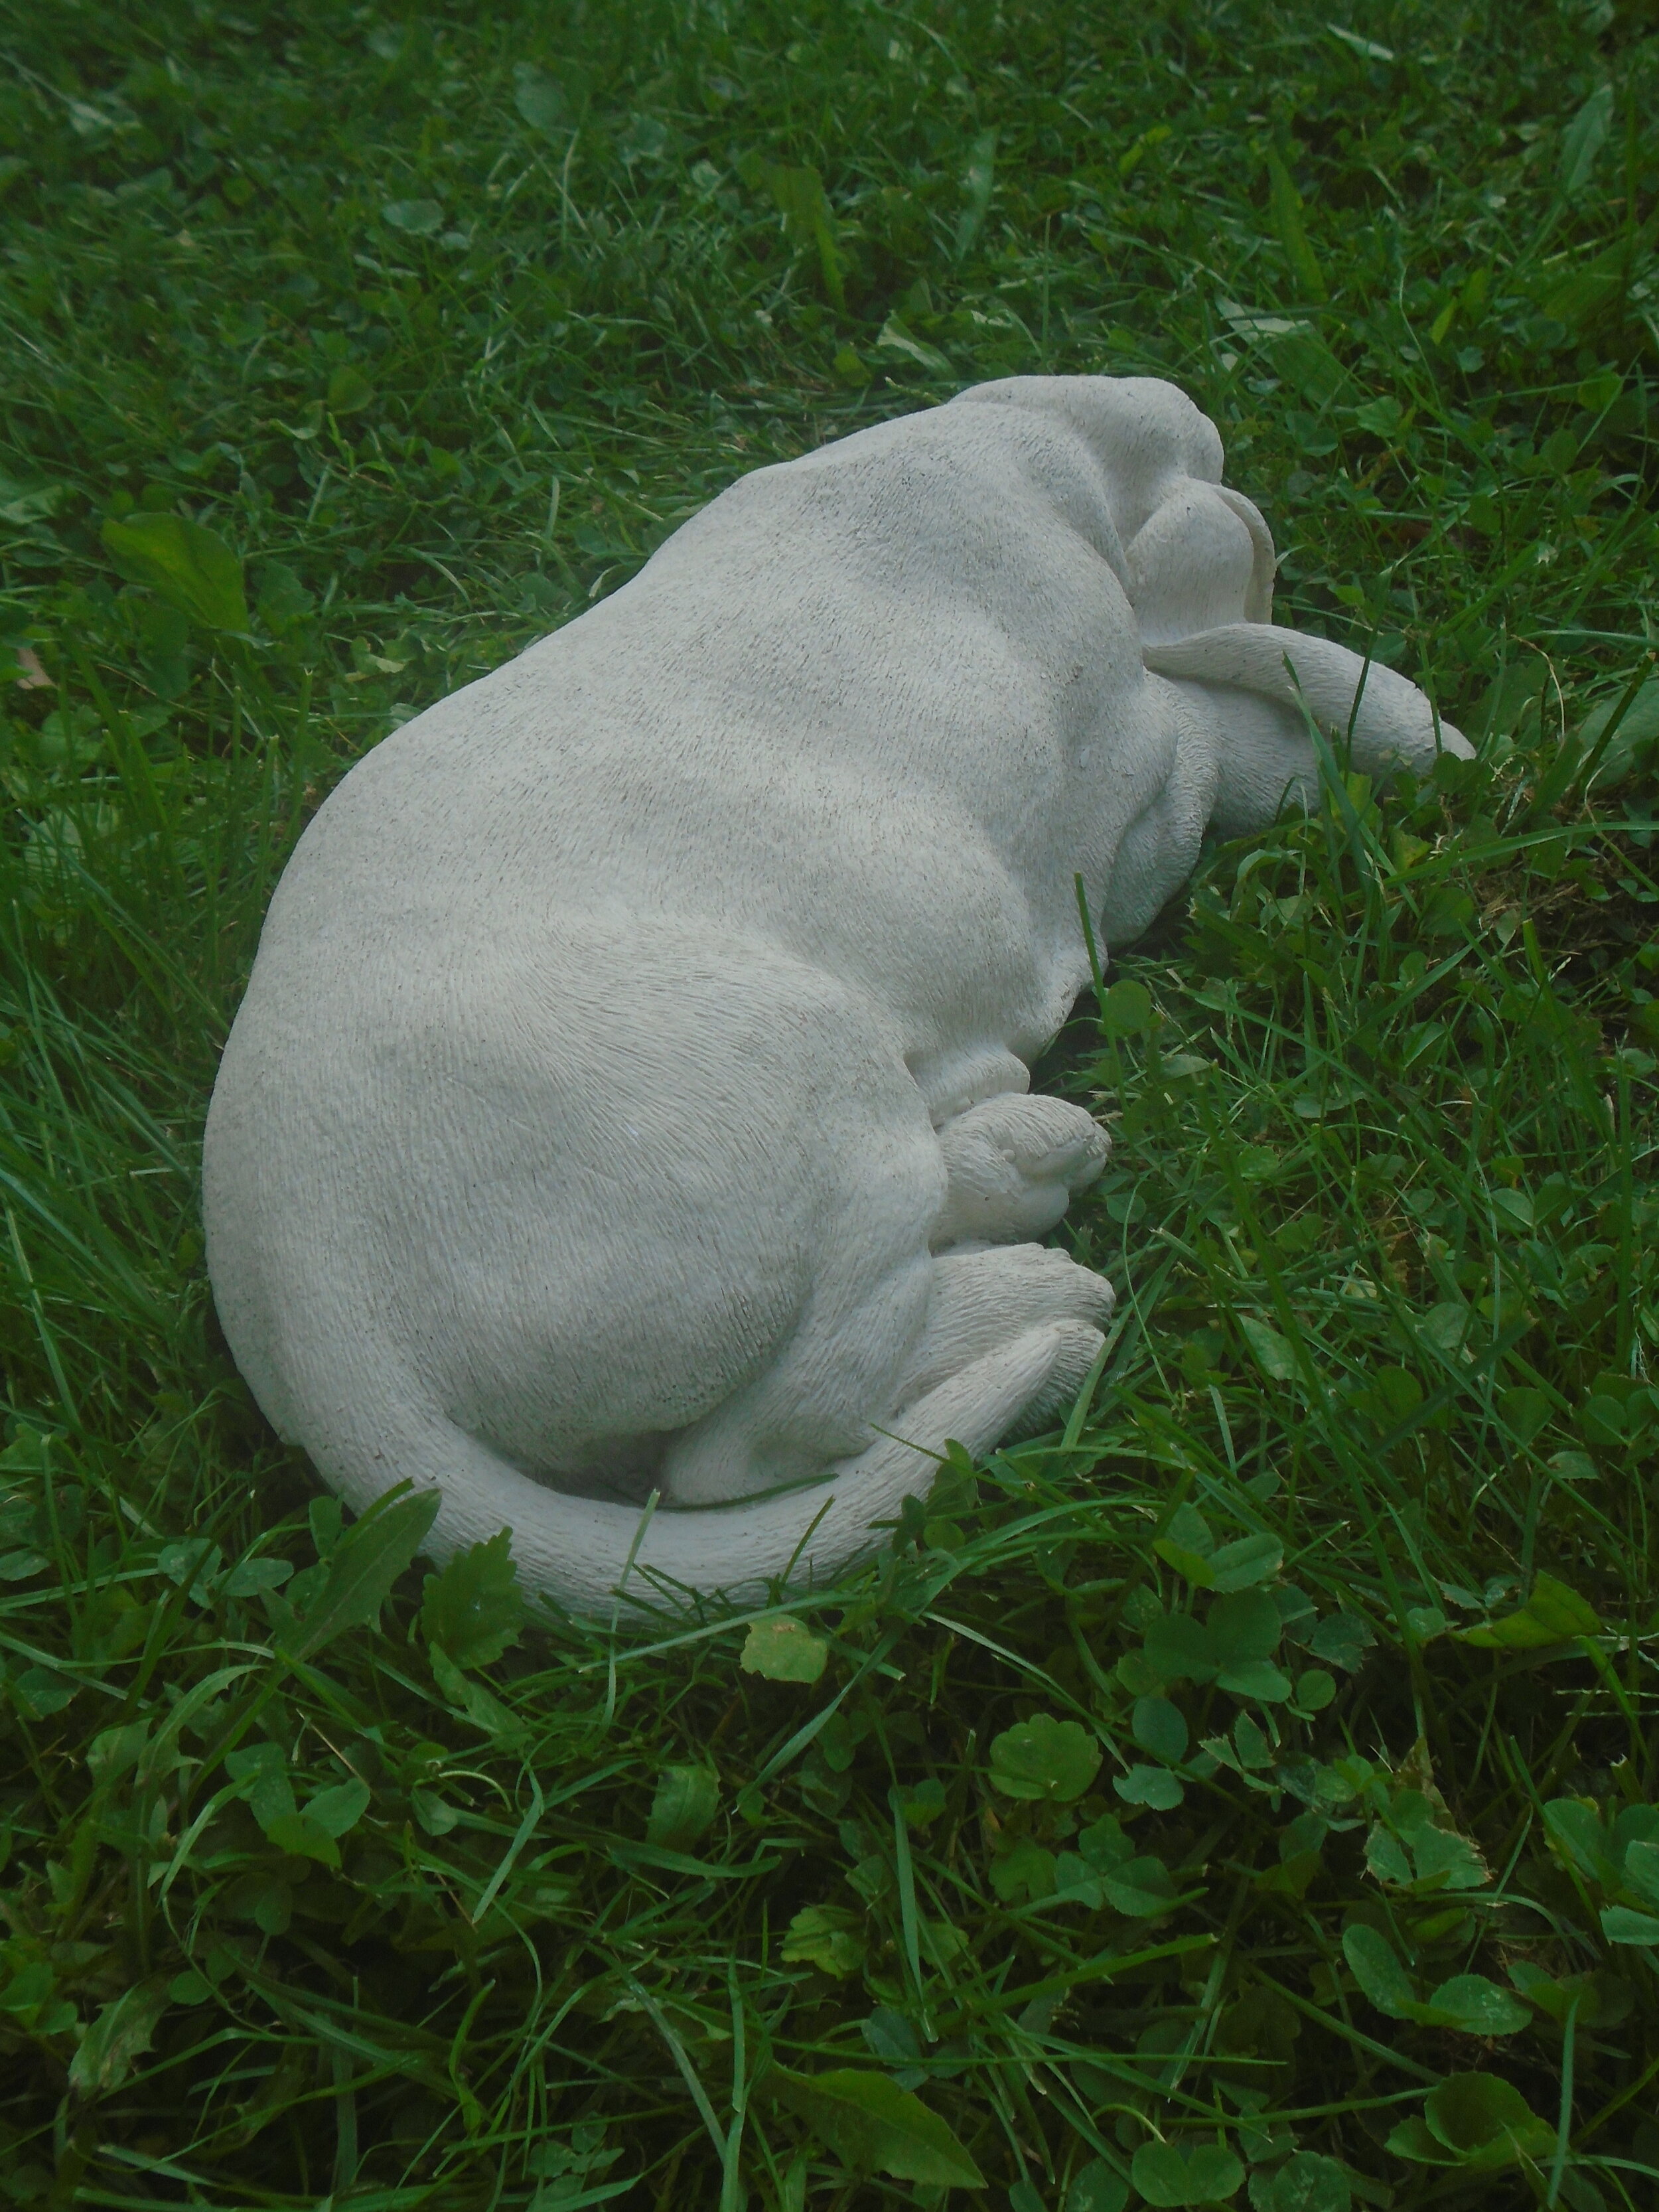 CONCRETE BASSET HOUND STATUE OR USE AS A MEMORIAL,,,GRAVE MARKER 